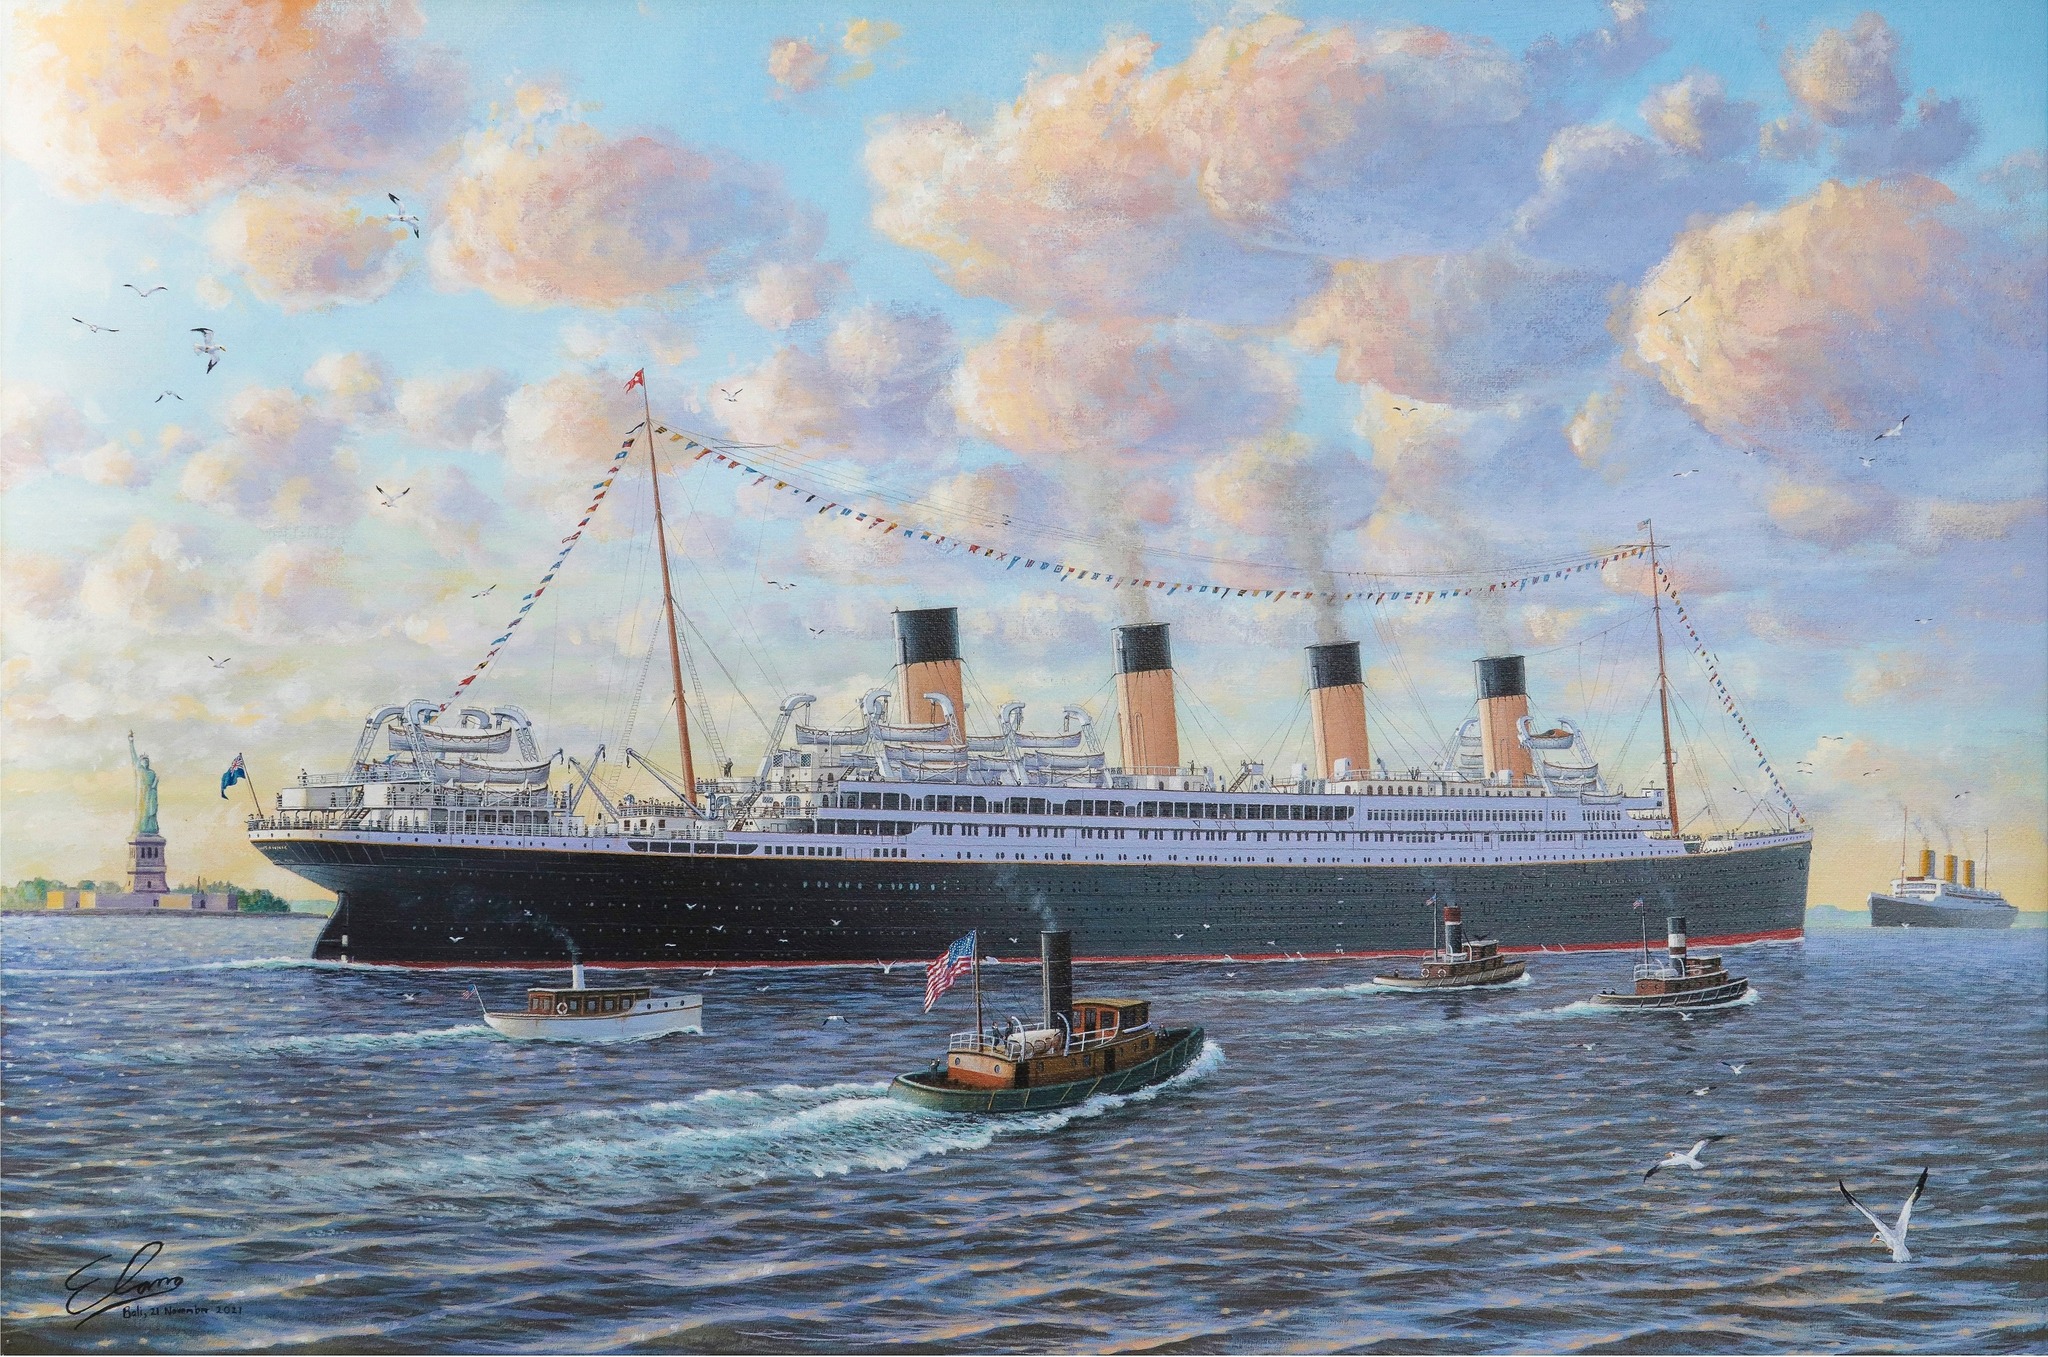 Britannic: The Palace That Never Was